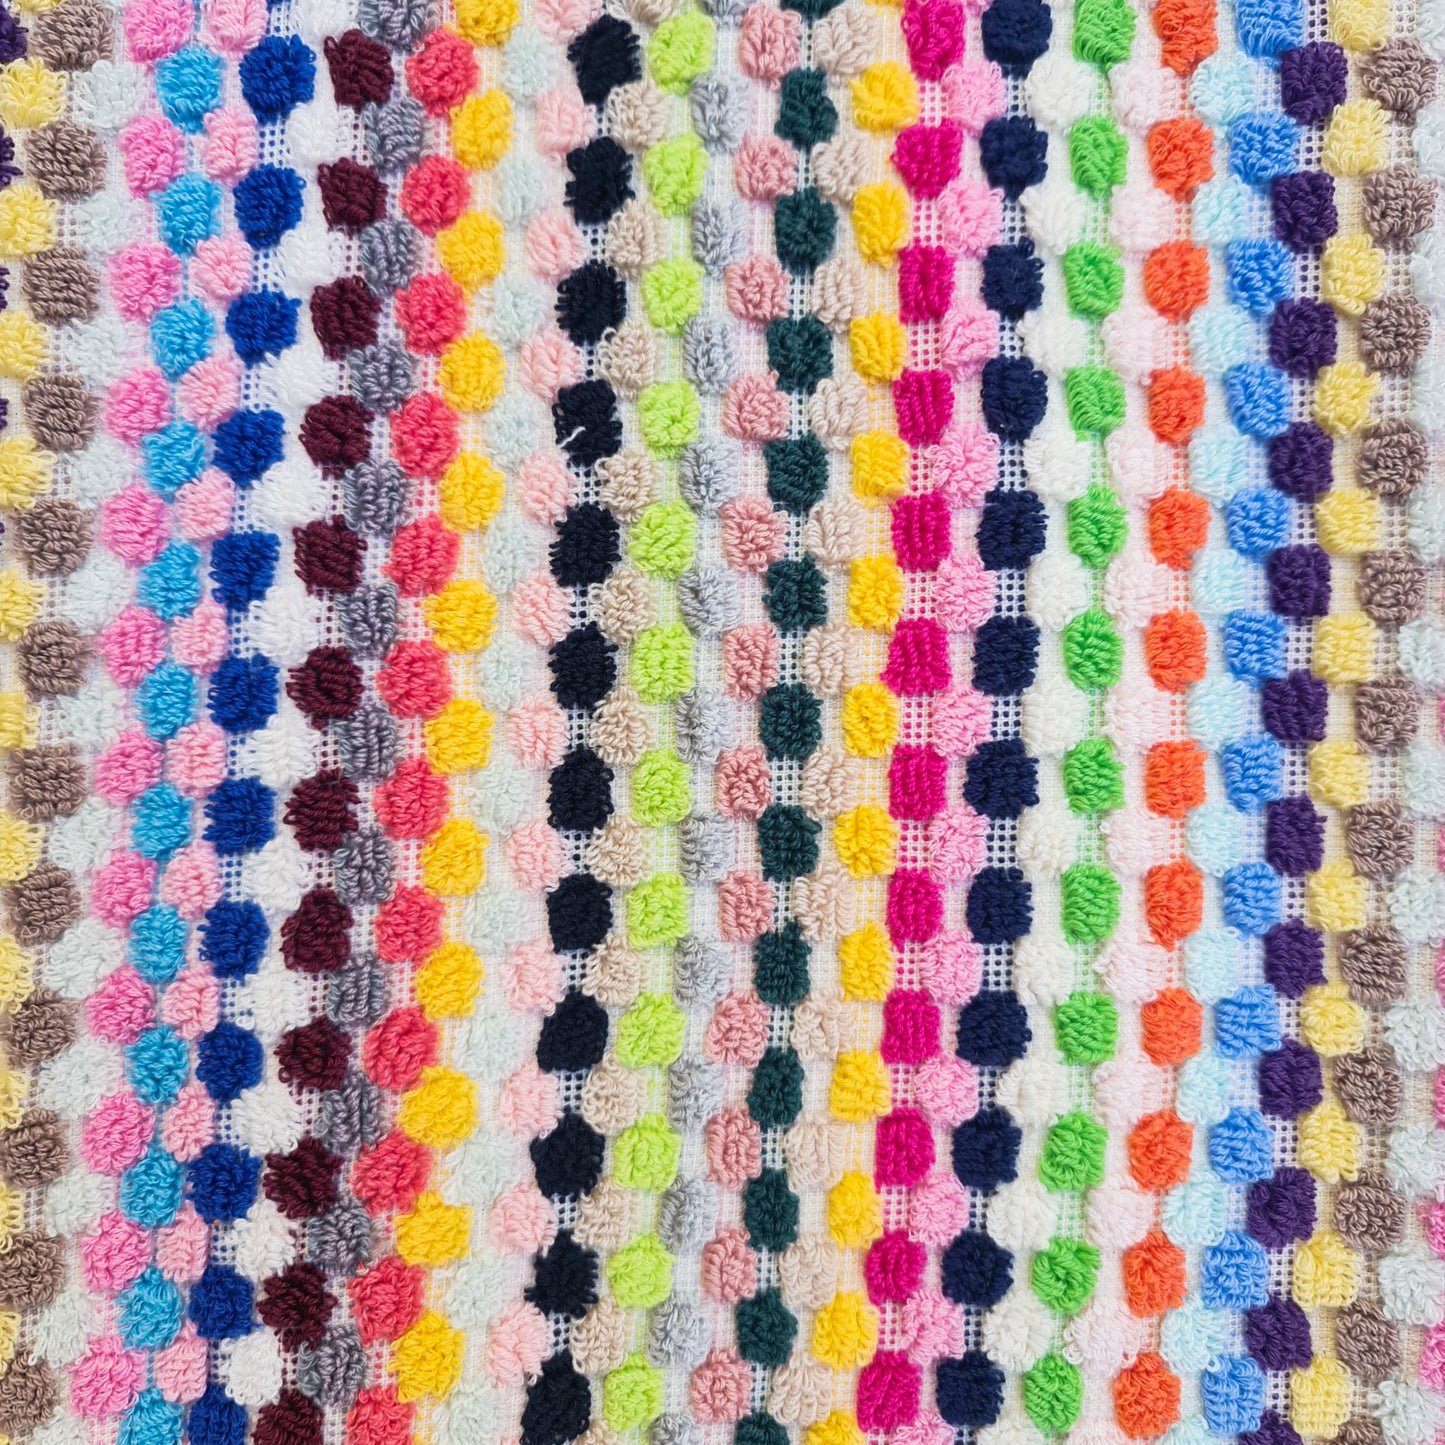 Turkish Hammam Bath Terry Towels Multi Color Dotted